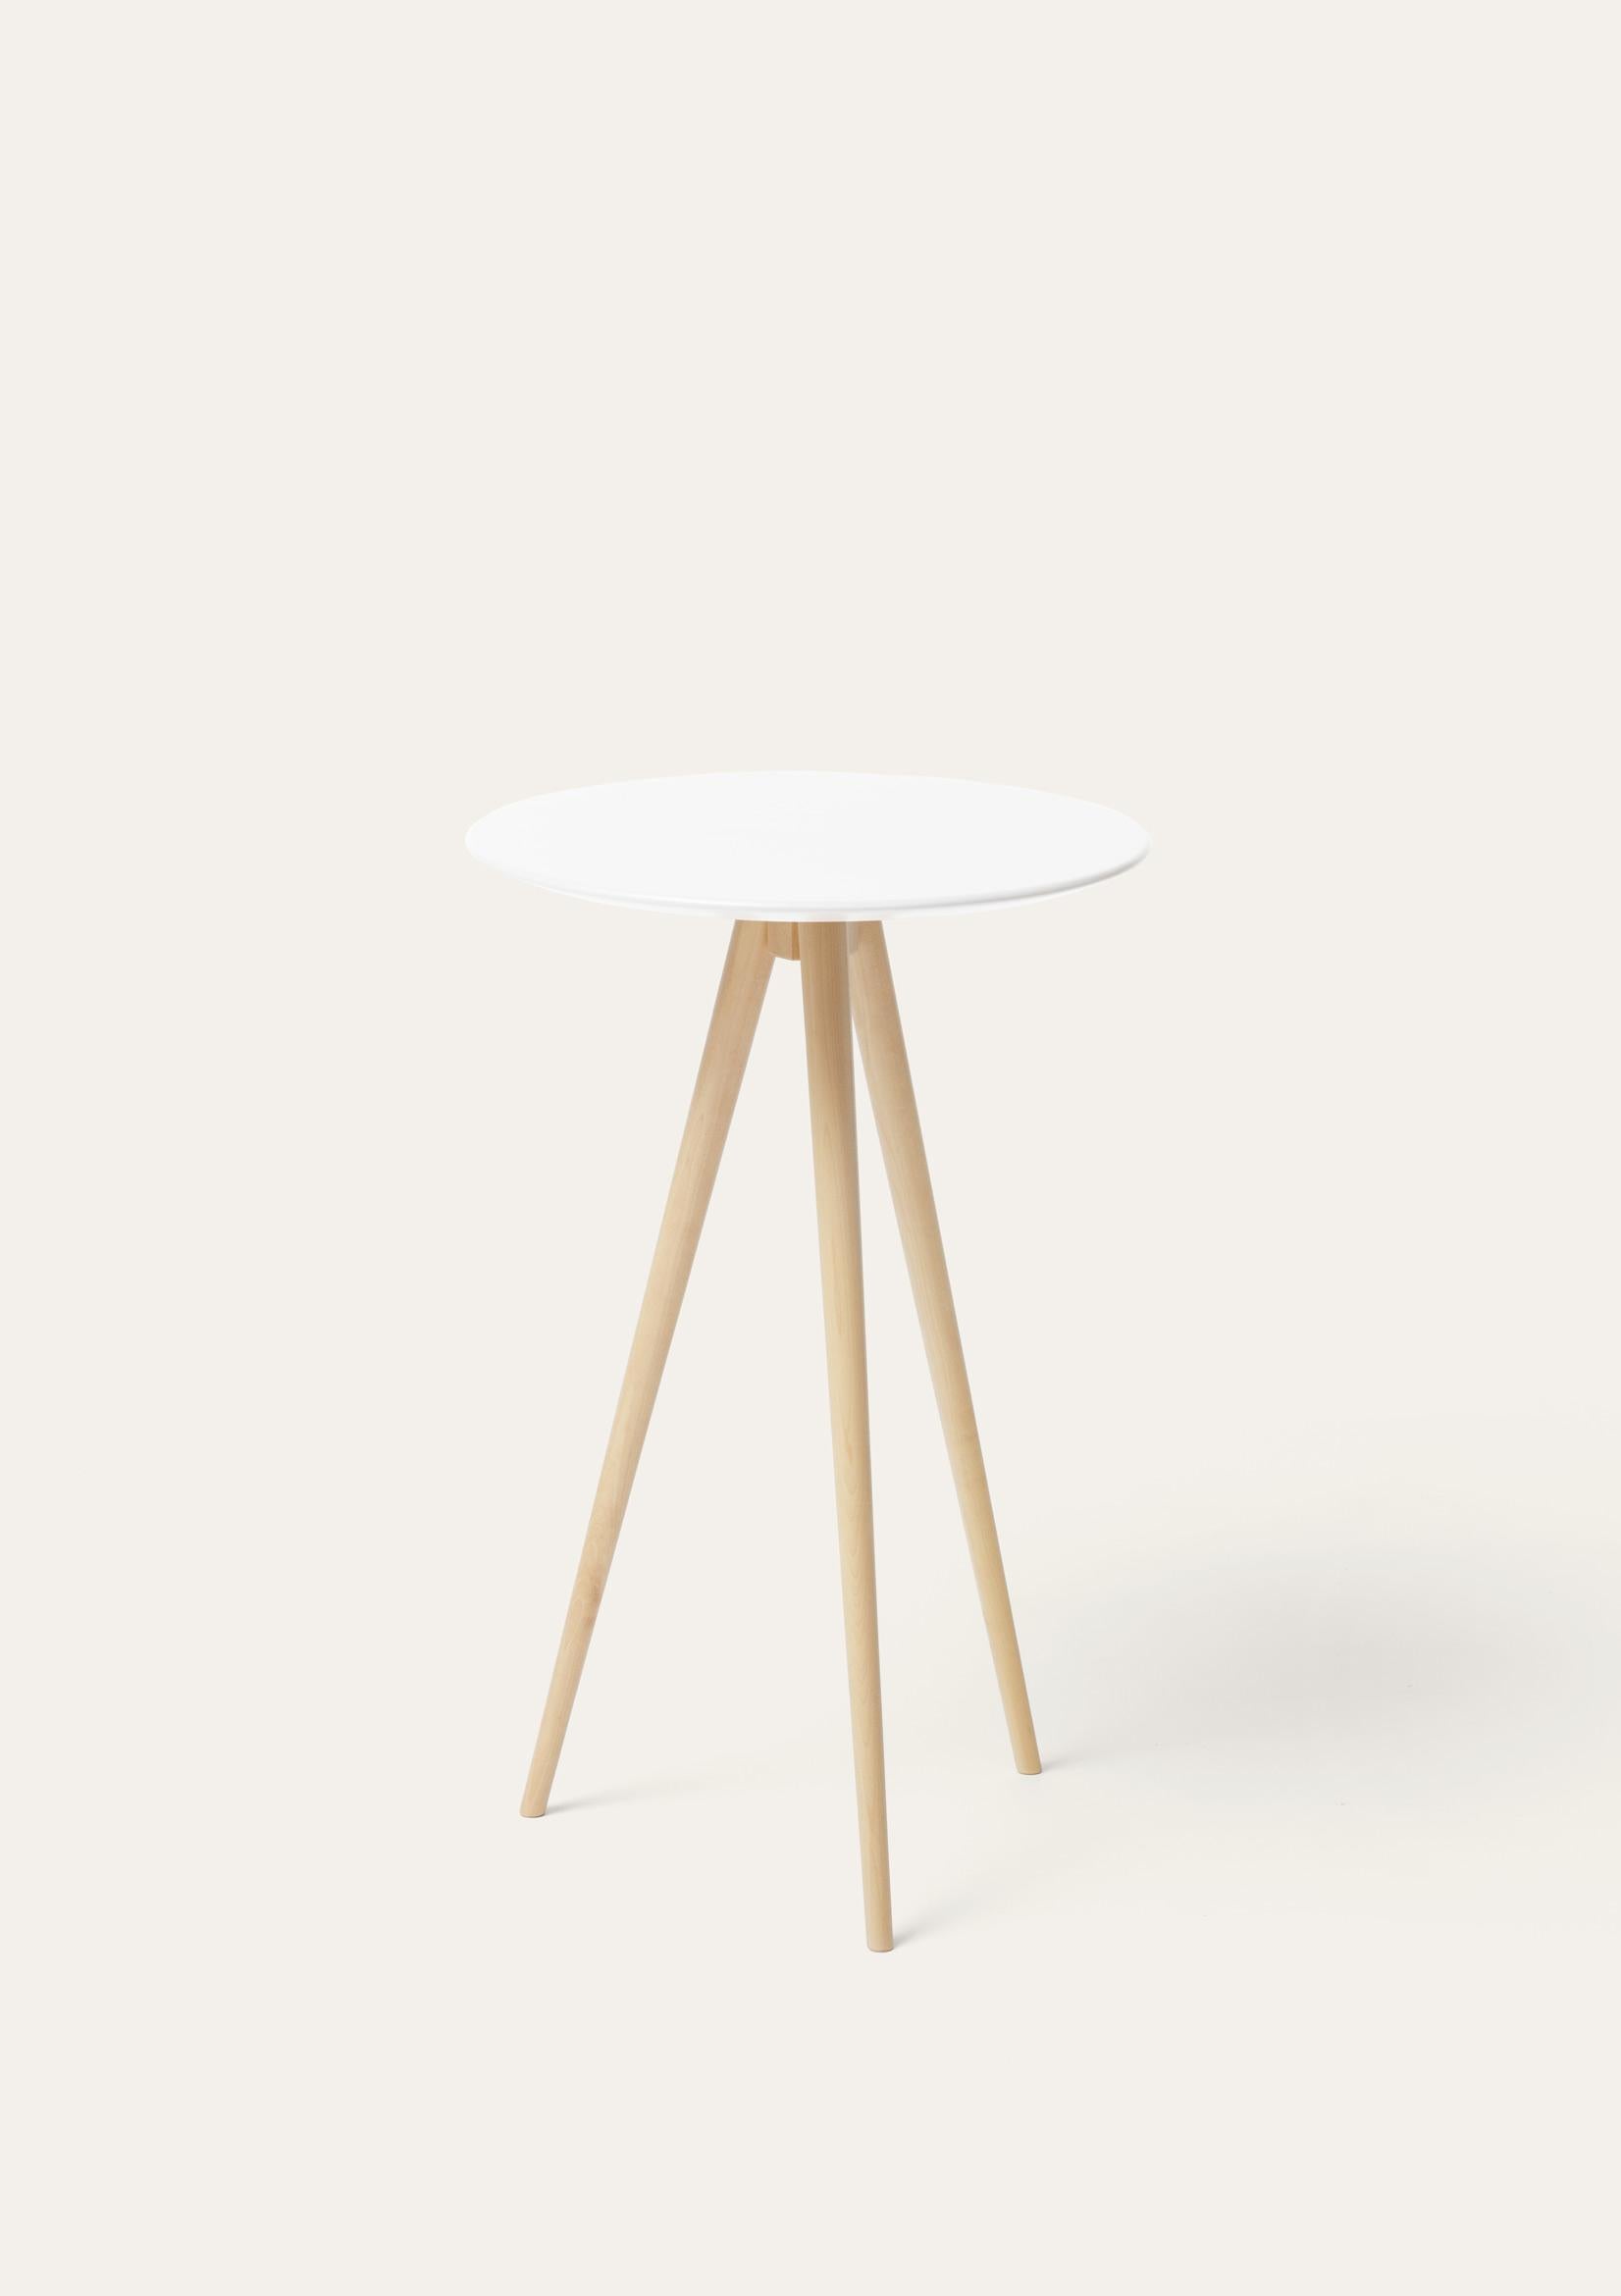 White and natural Trip side table by Storängen Design
Dimensions: D 35 x H 62 cm
Materials: birch wood.
Also available in other colors.

Trip is our smallest table, a lightweight three-legged surface entirely made of birch. A decorative item